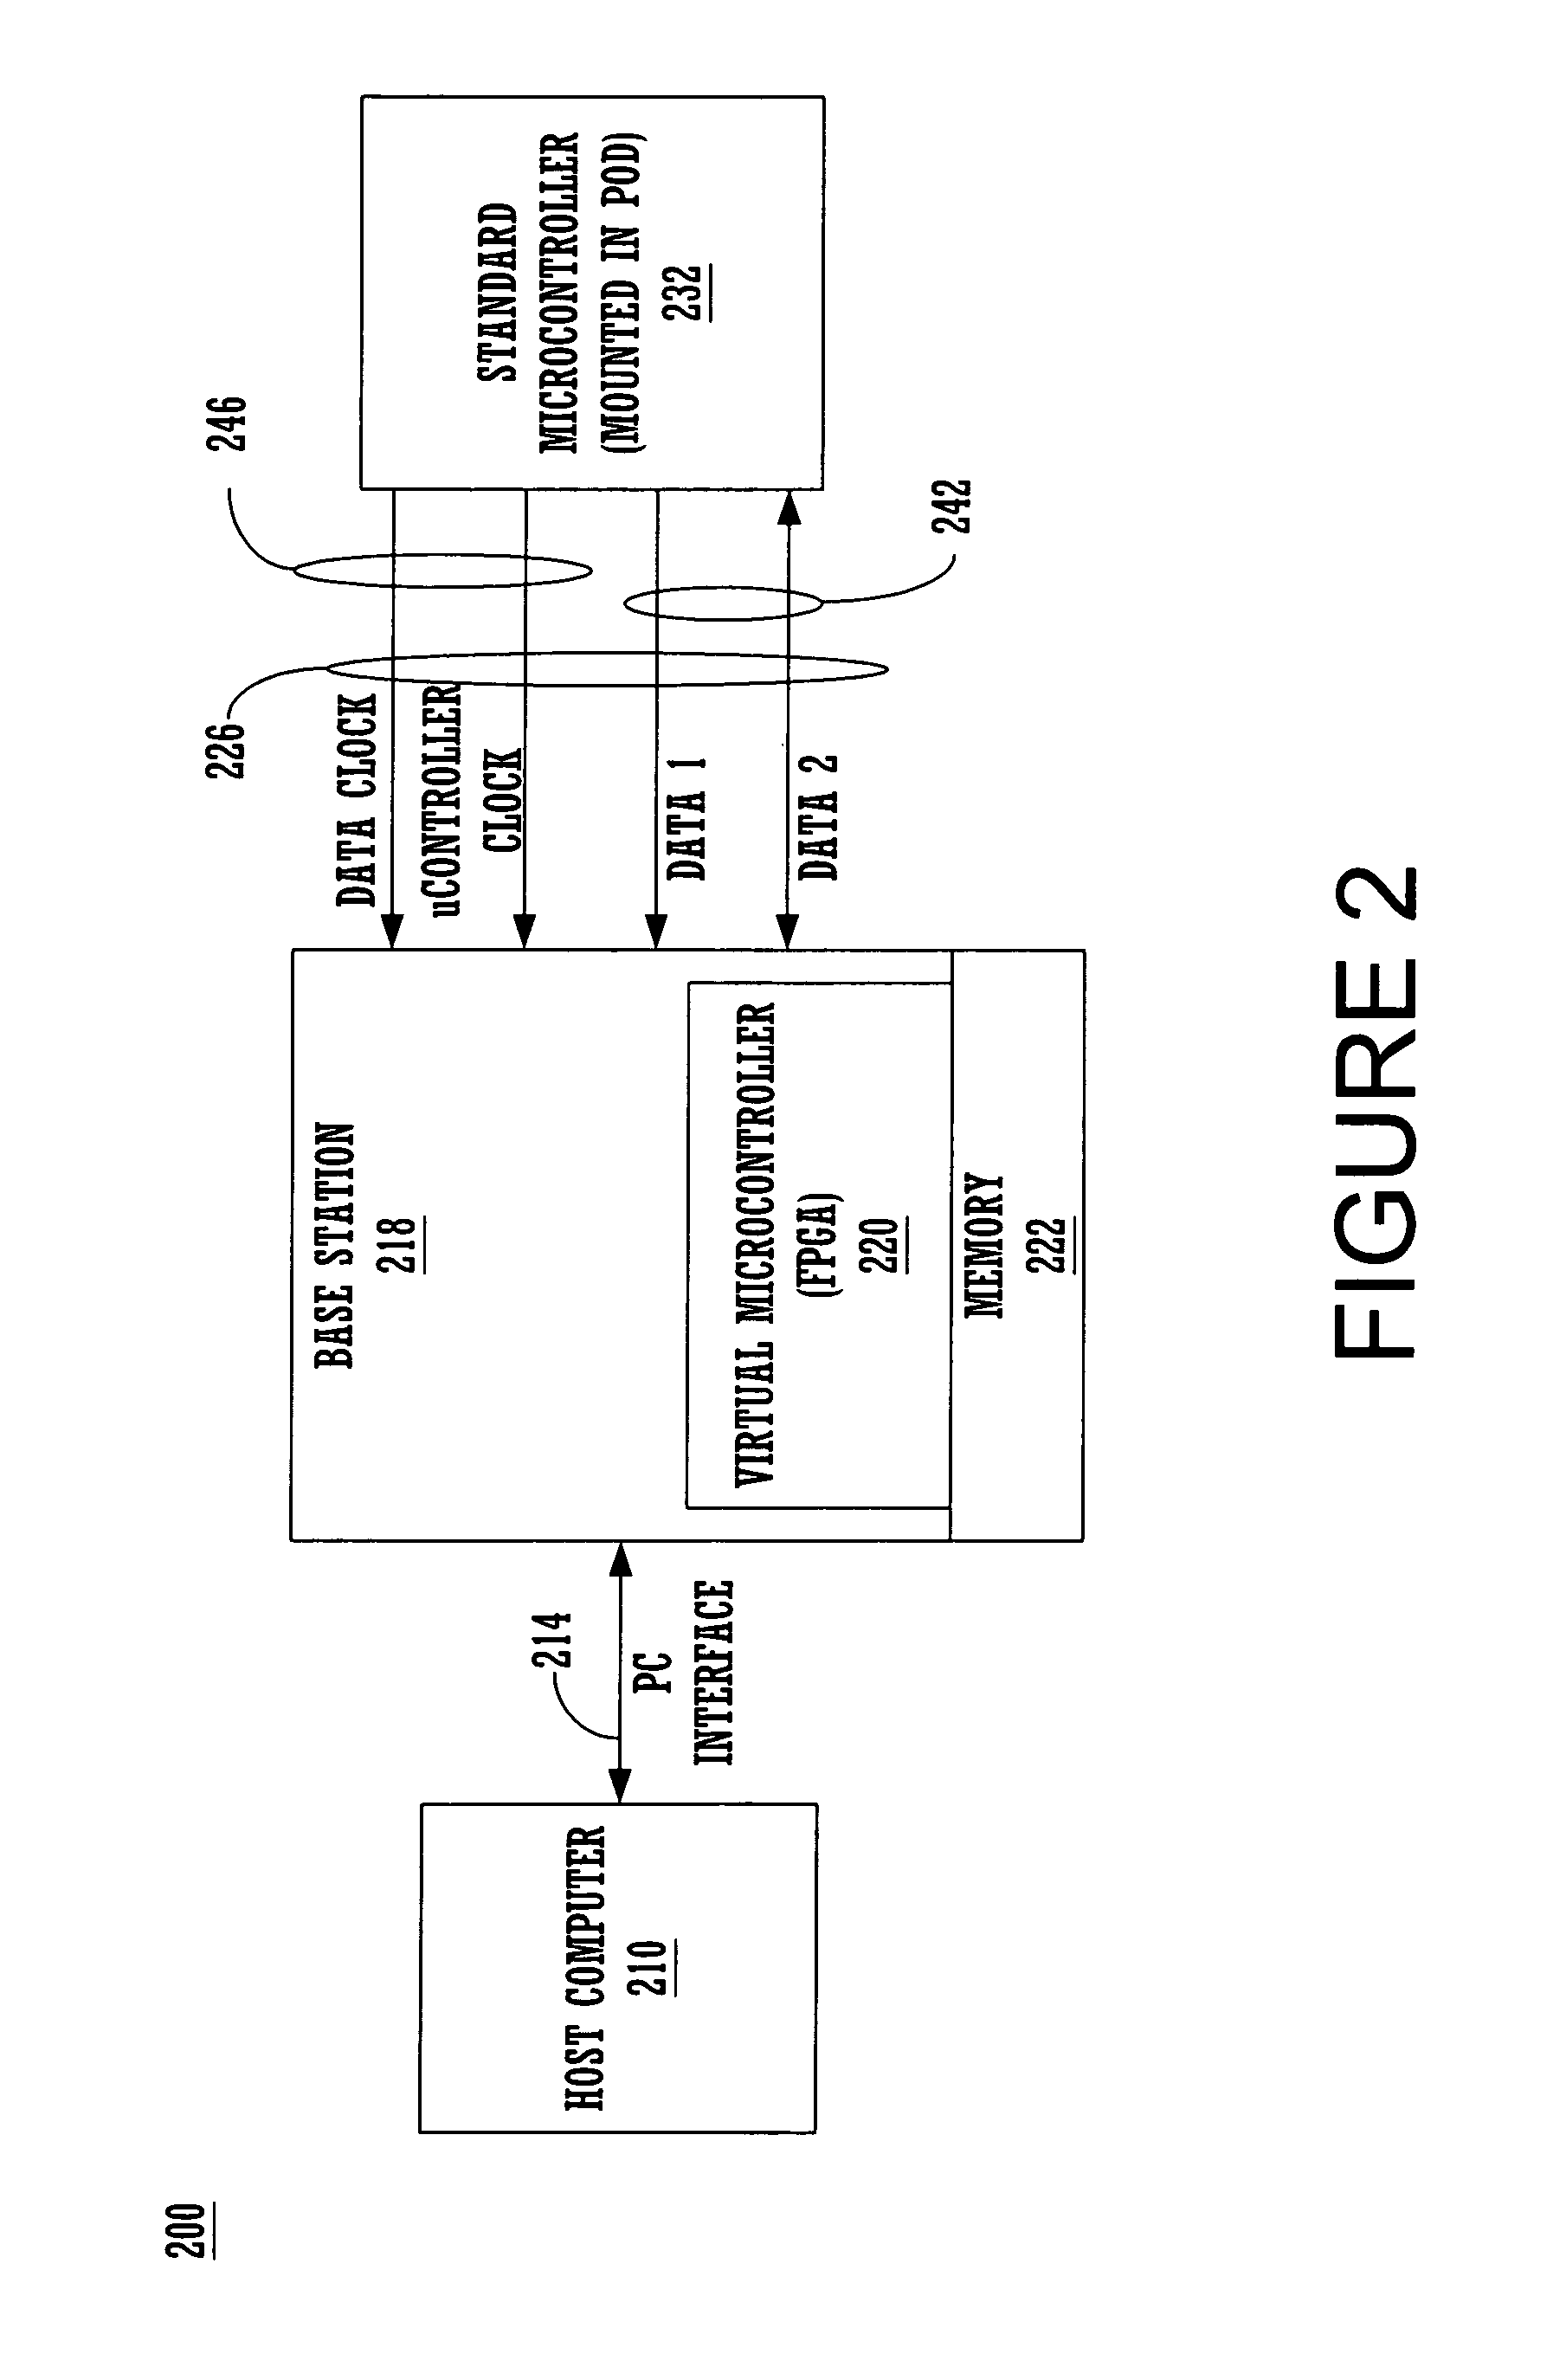 Emulator chip/board architecture and interface